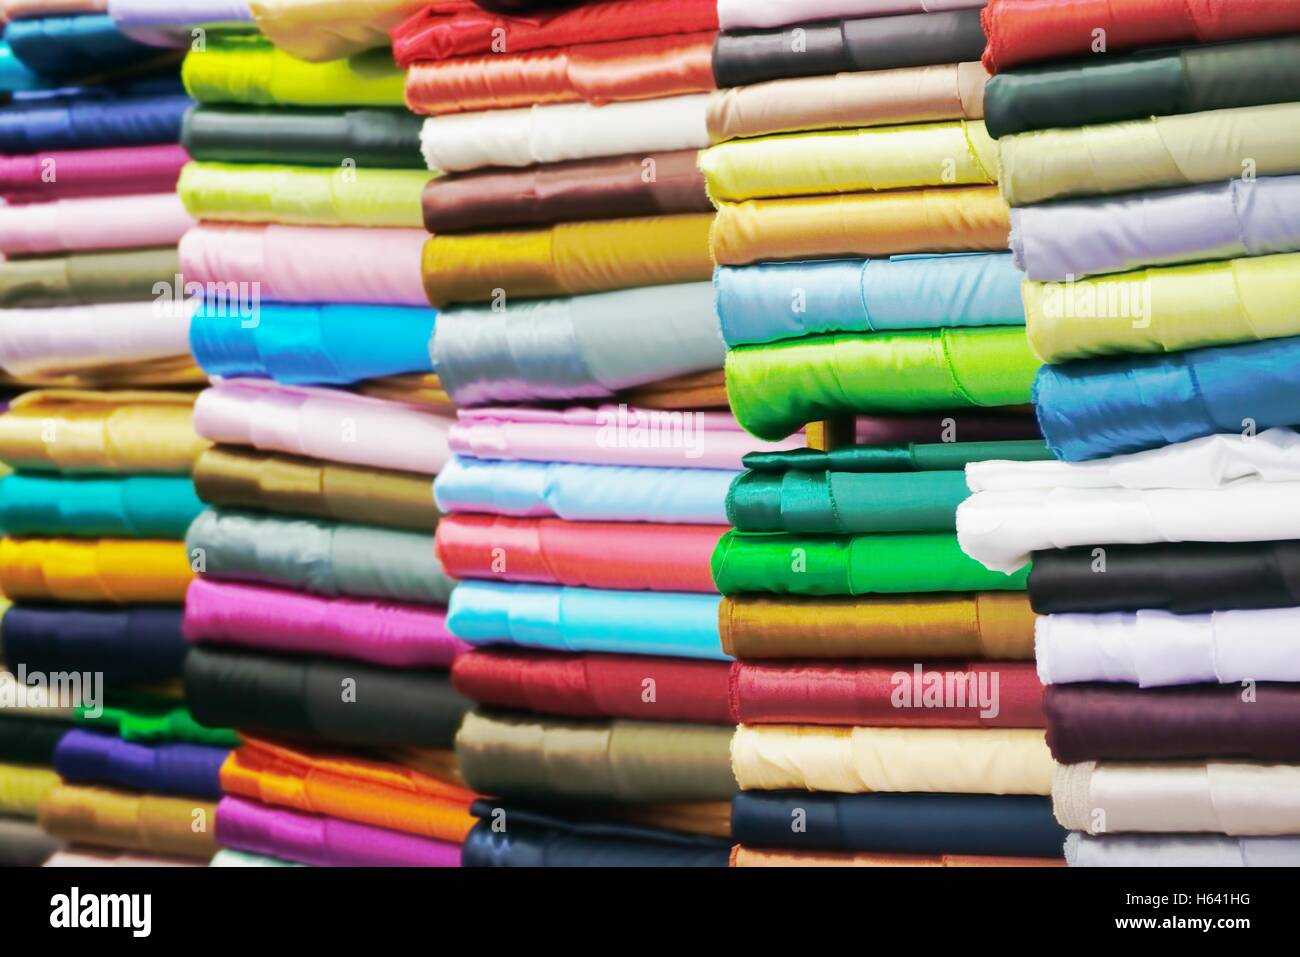 Colorful fabric rolls Stock Photo